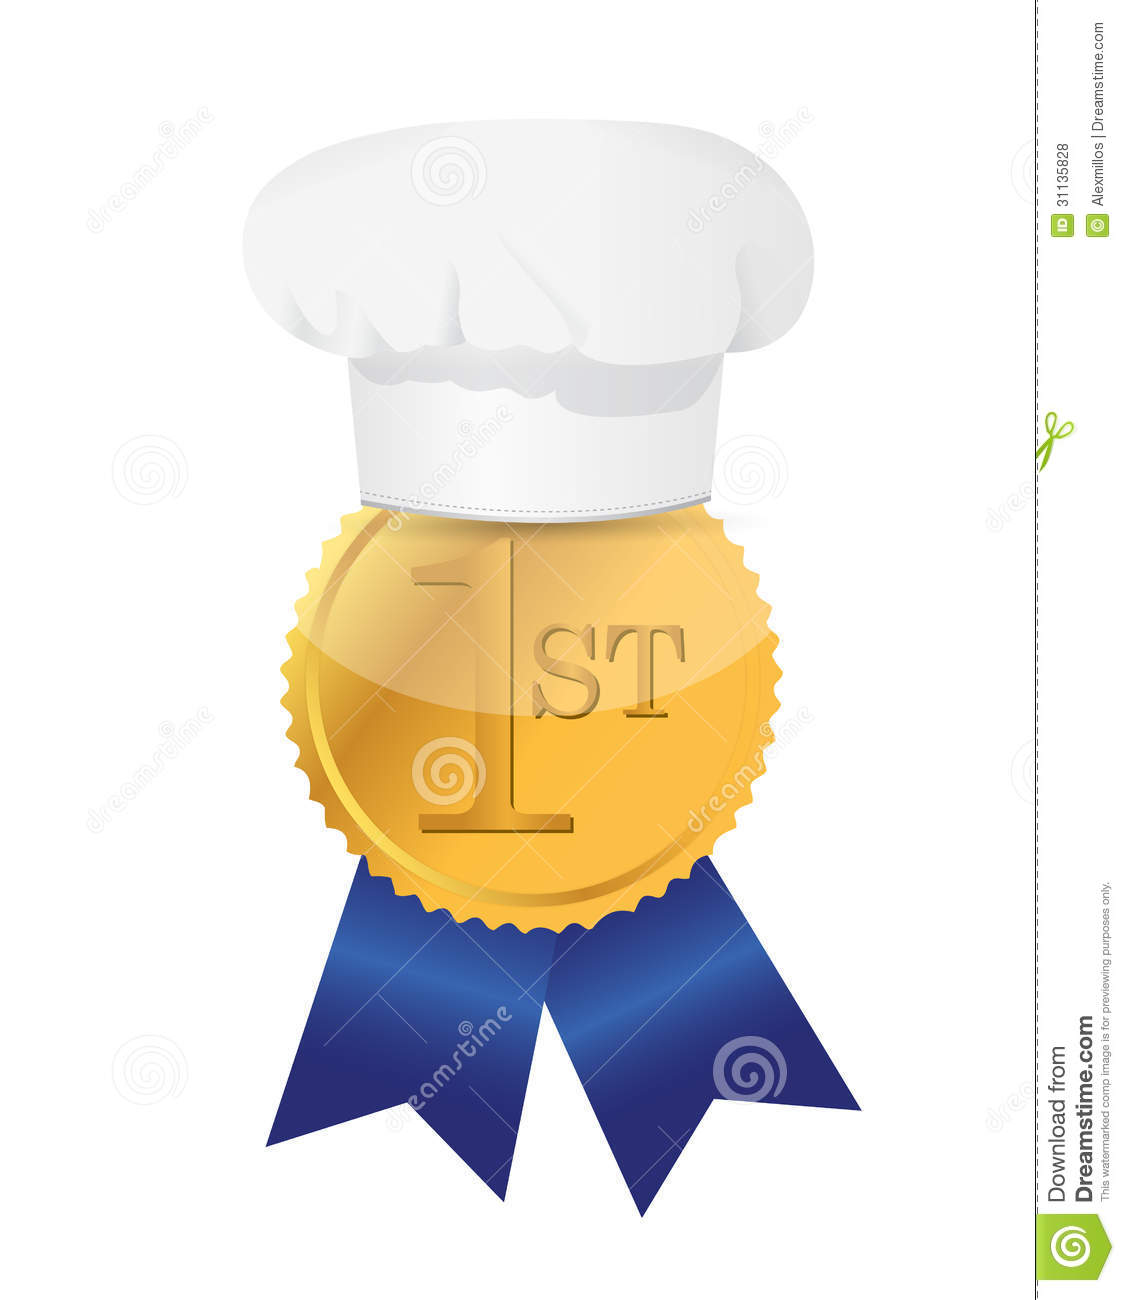 1st Place Ribbon Cake Ideas And Designs